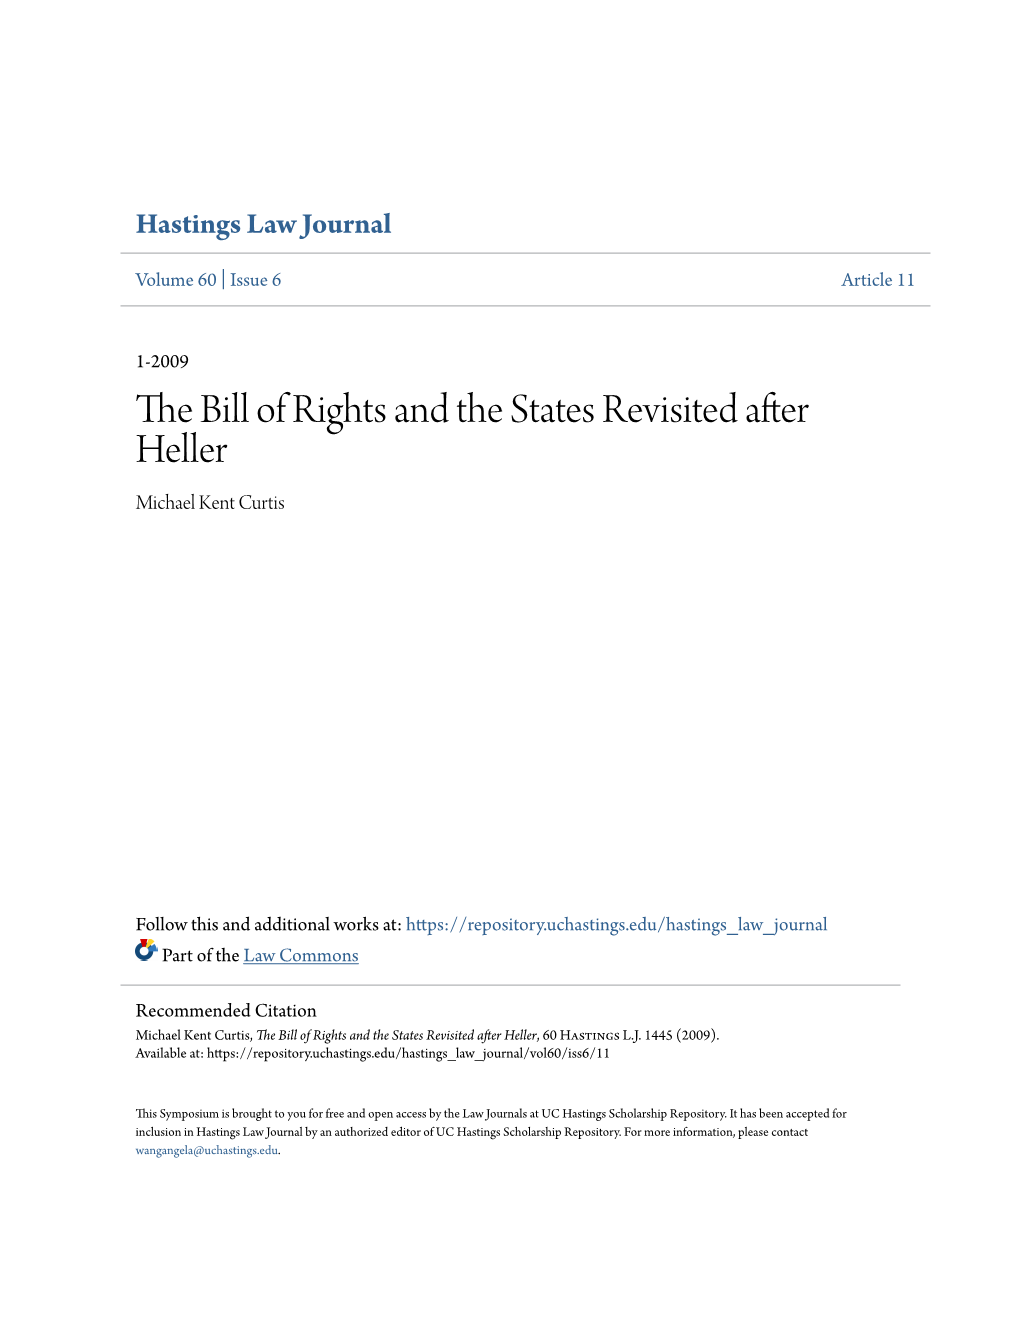 The Bill of Rights and the States Revisited After Heller, 60 Hastings L.J